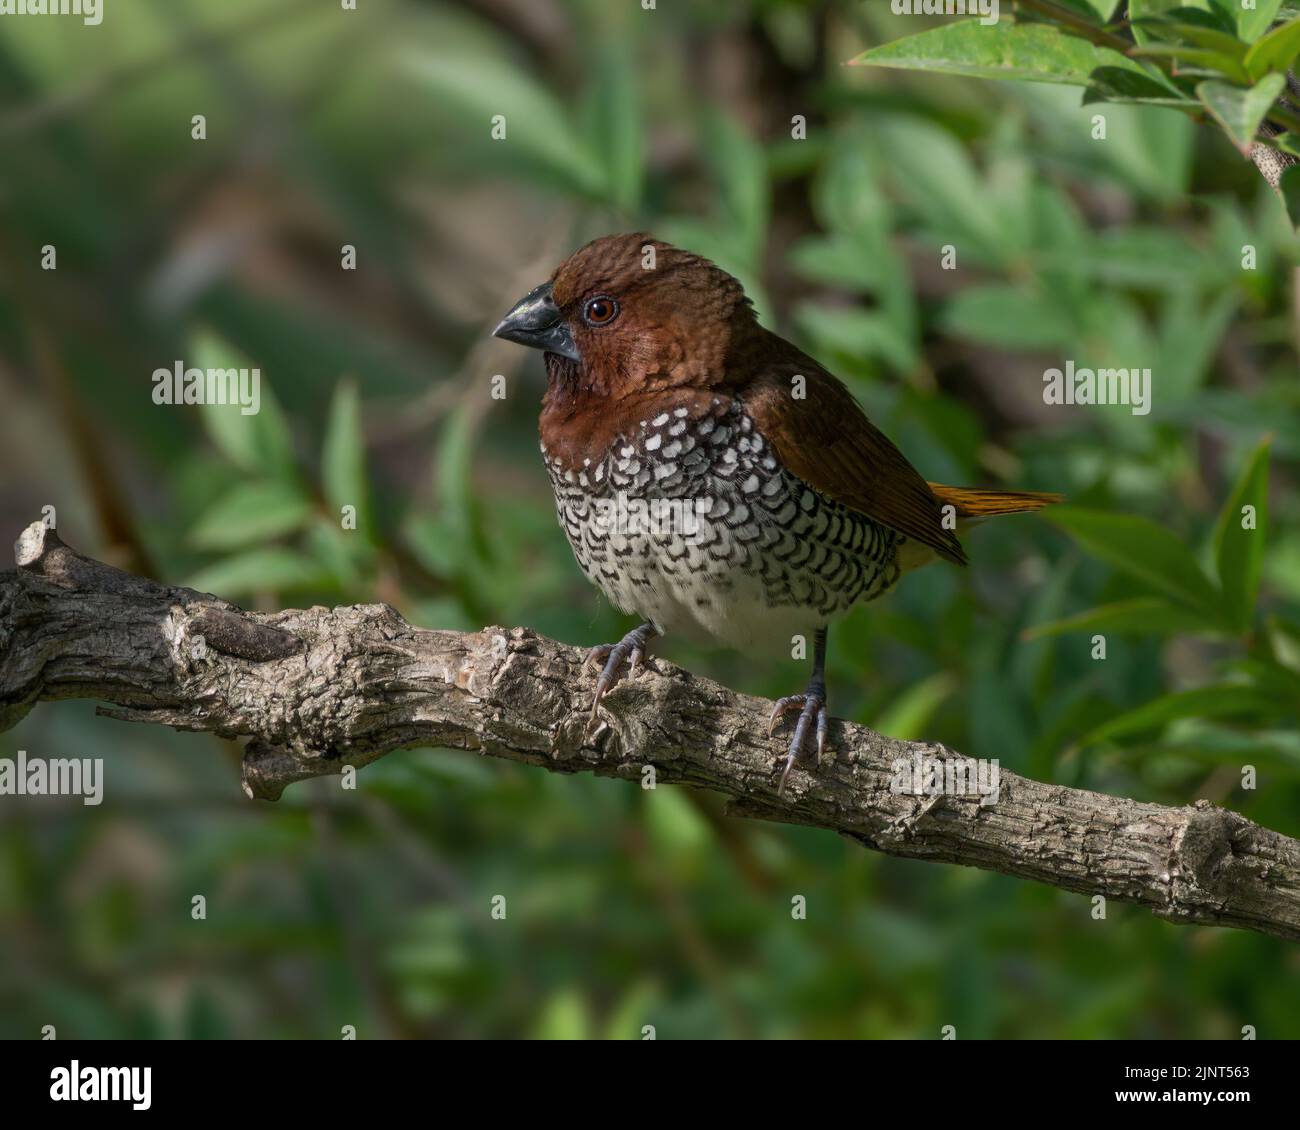 Scaly-breasted Munia or Spotted Munia, Lonchura punctulata,  shown in Arcadia, Southern California. Considered an invasive species in the USA. Stock Photo